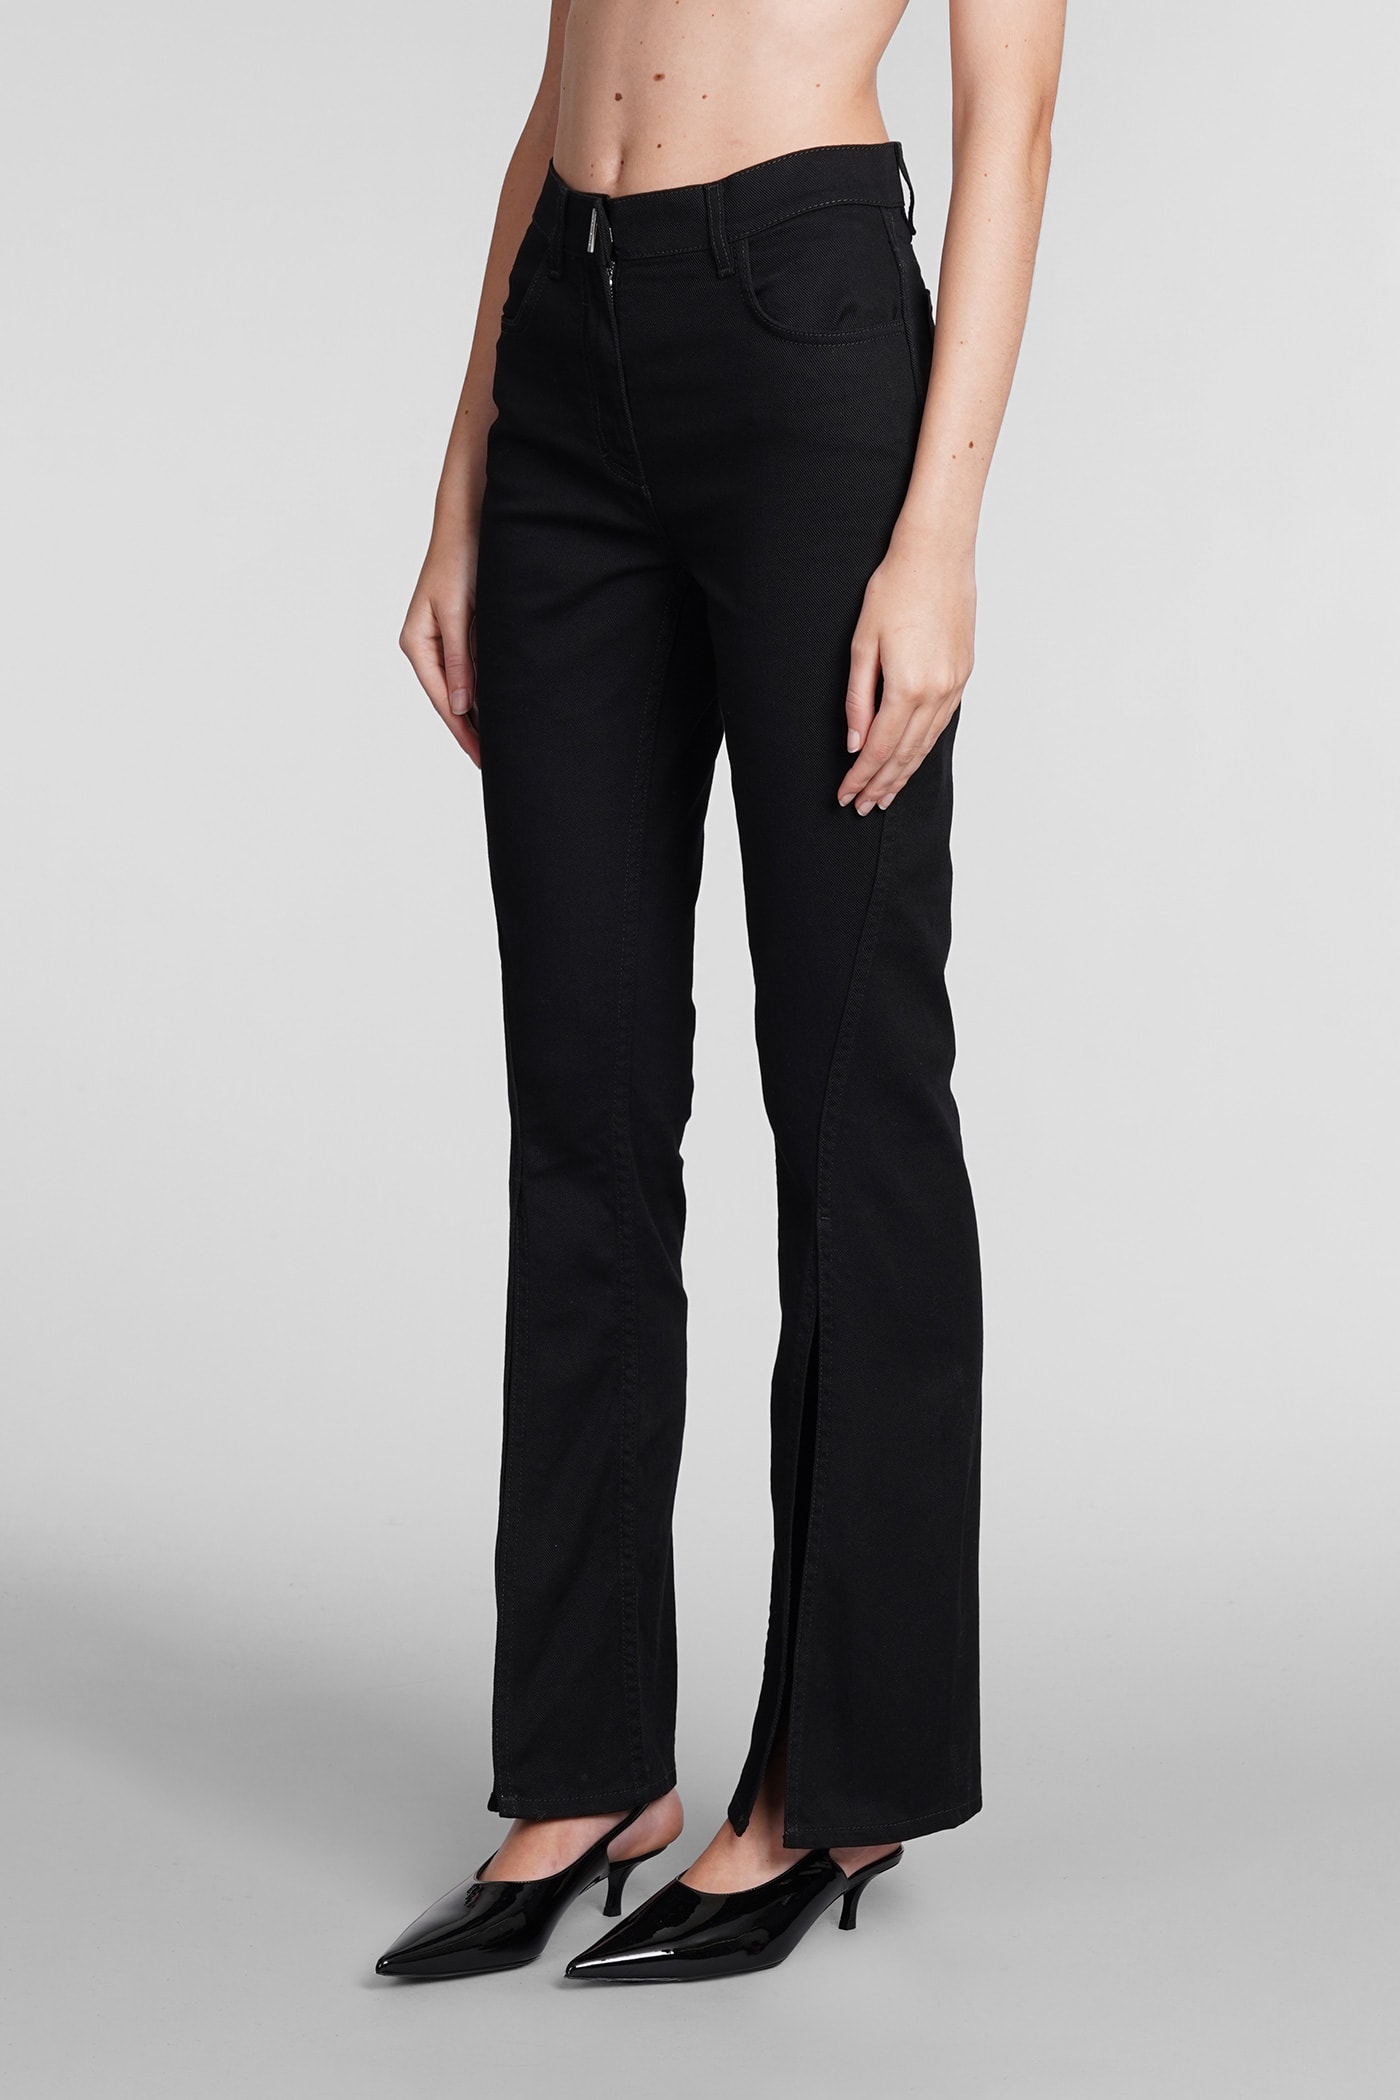 Shop Givenchy Jeans In Black Cotton